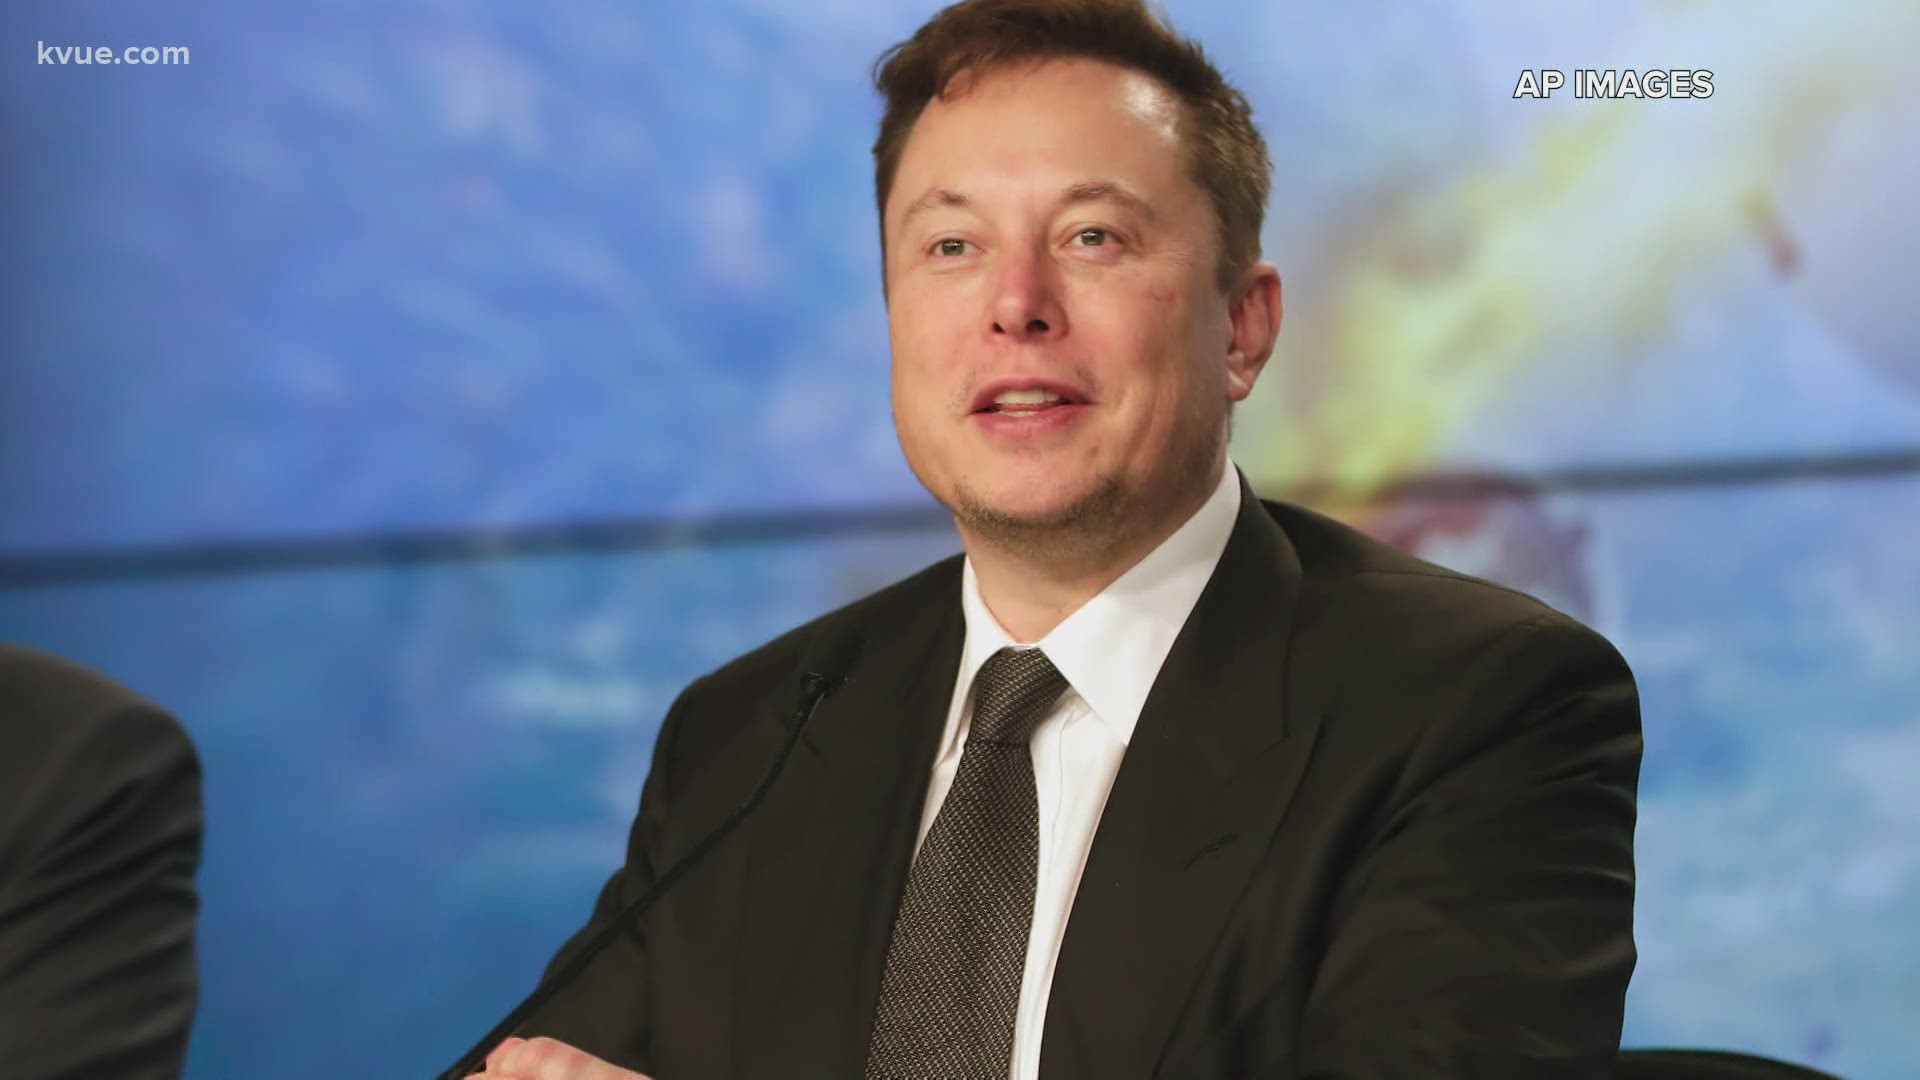 Tesla and SpaceX founder Elon Musk is officially a Texas resident. He confirmed the news in an interview with the Wall Street Journal.